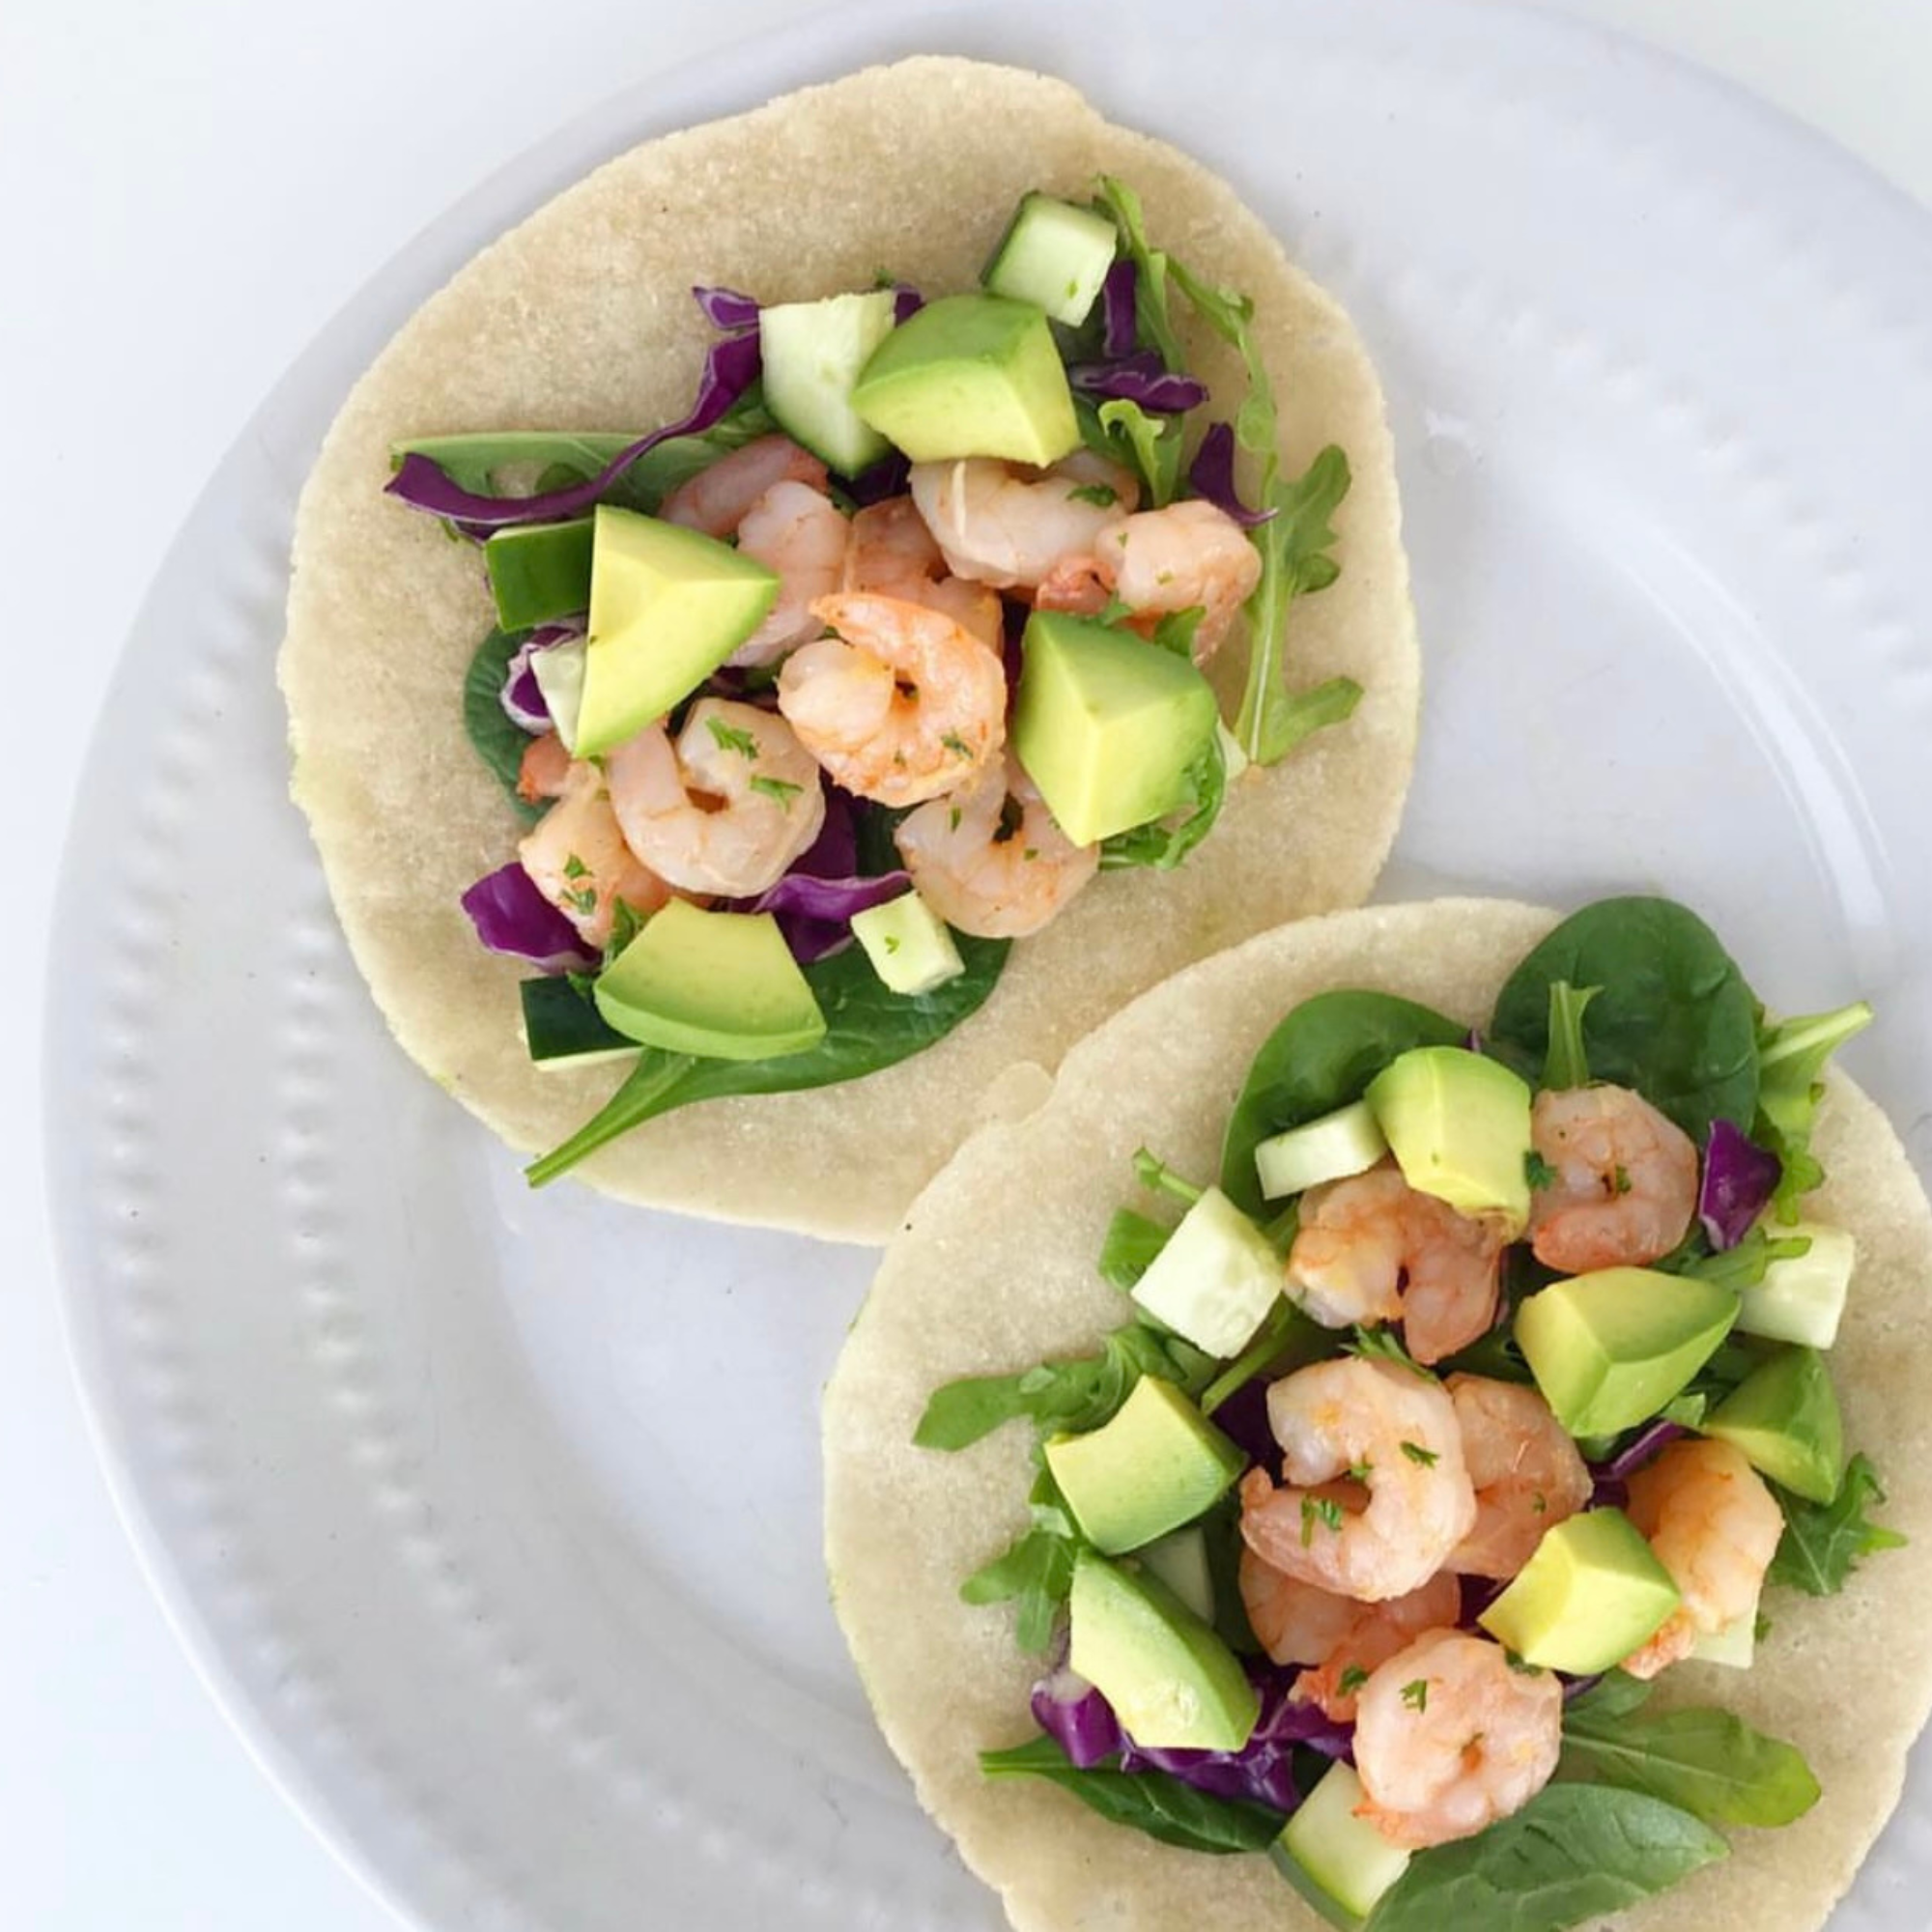 a white plate that has two gluten free tortillas topped with arugula, cucumbers, avocado and sauteed shrimp